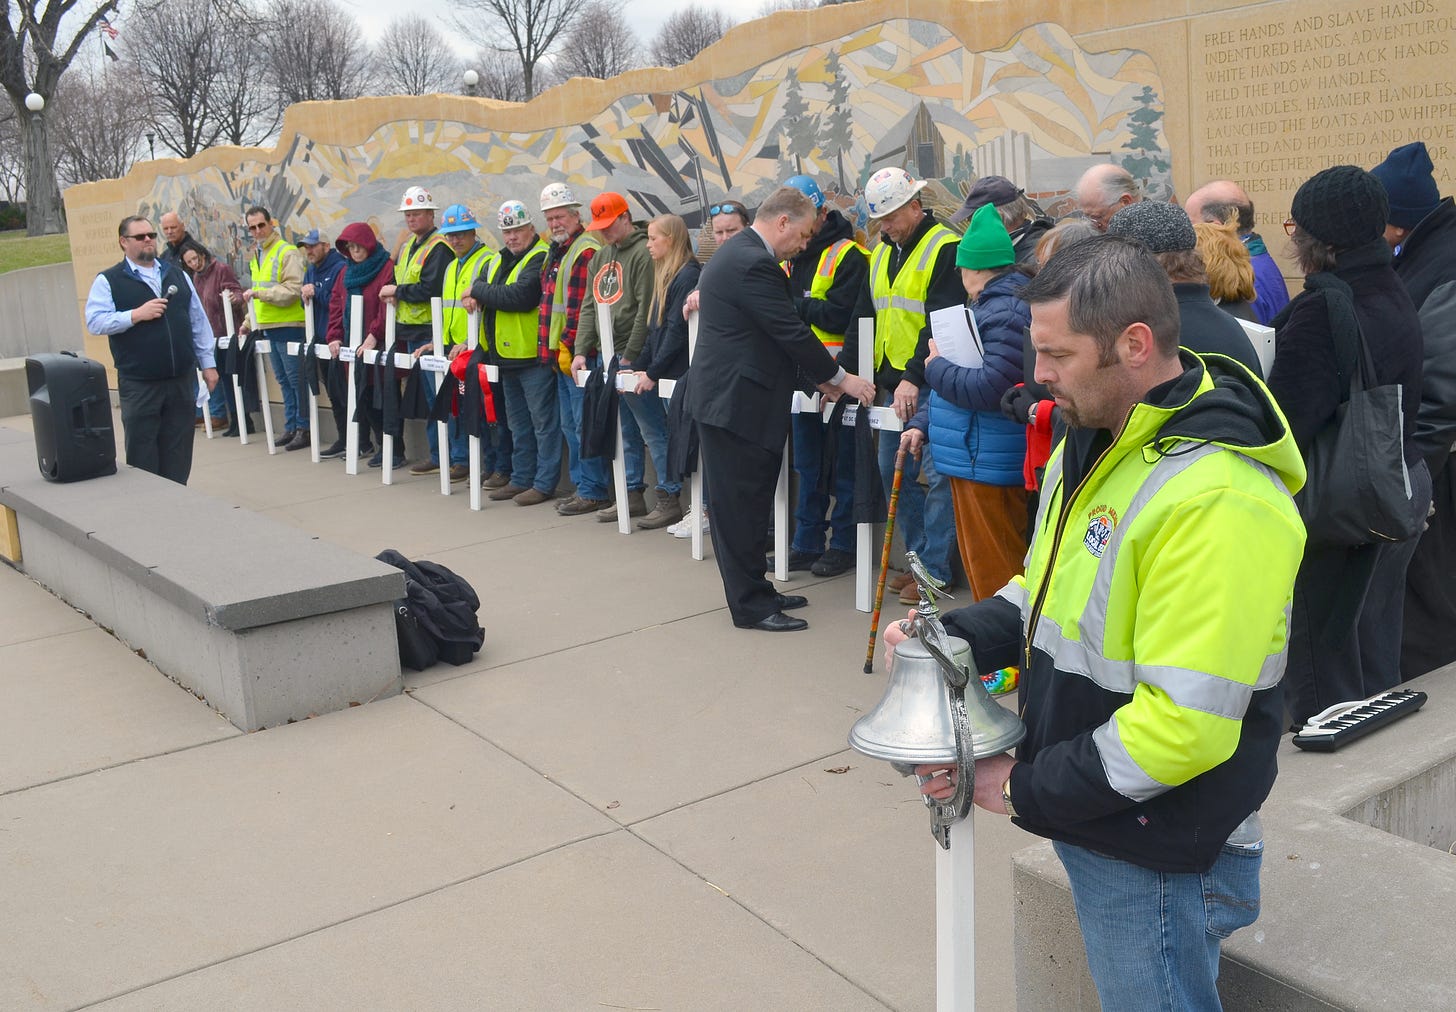 a line of people wearing neon vests and some hard hats stand behind white crosses in front of the workers monument mural